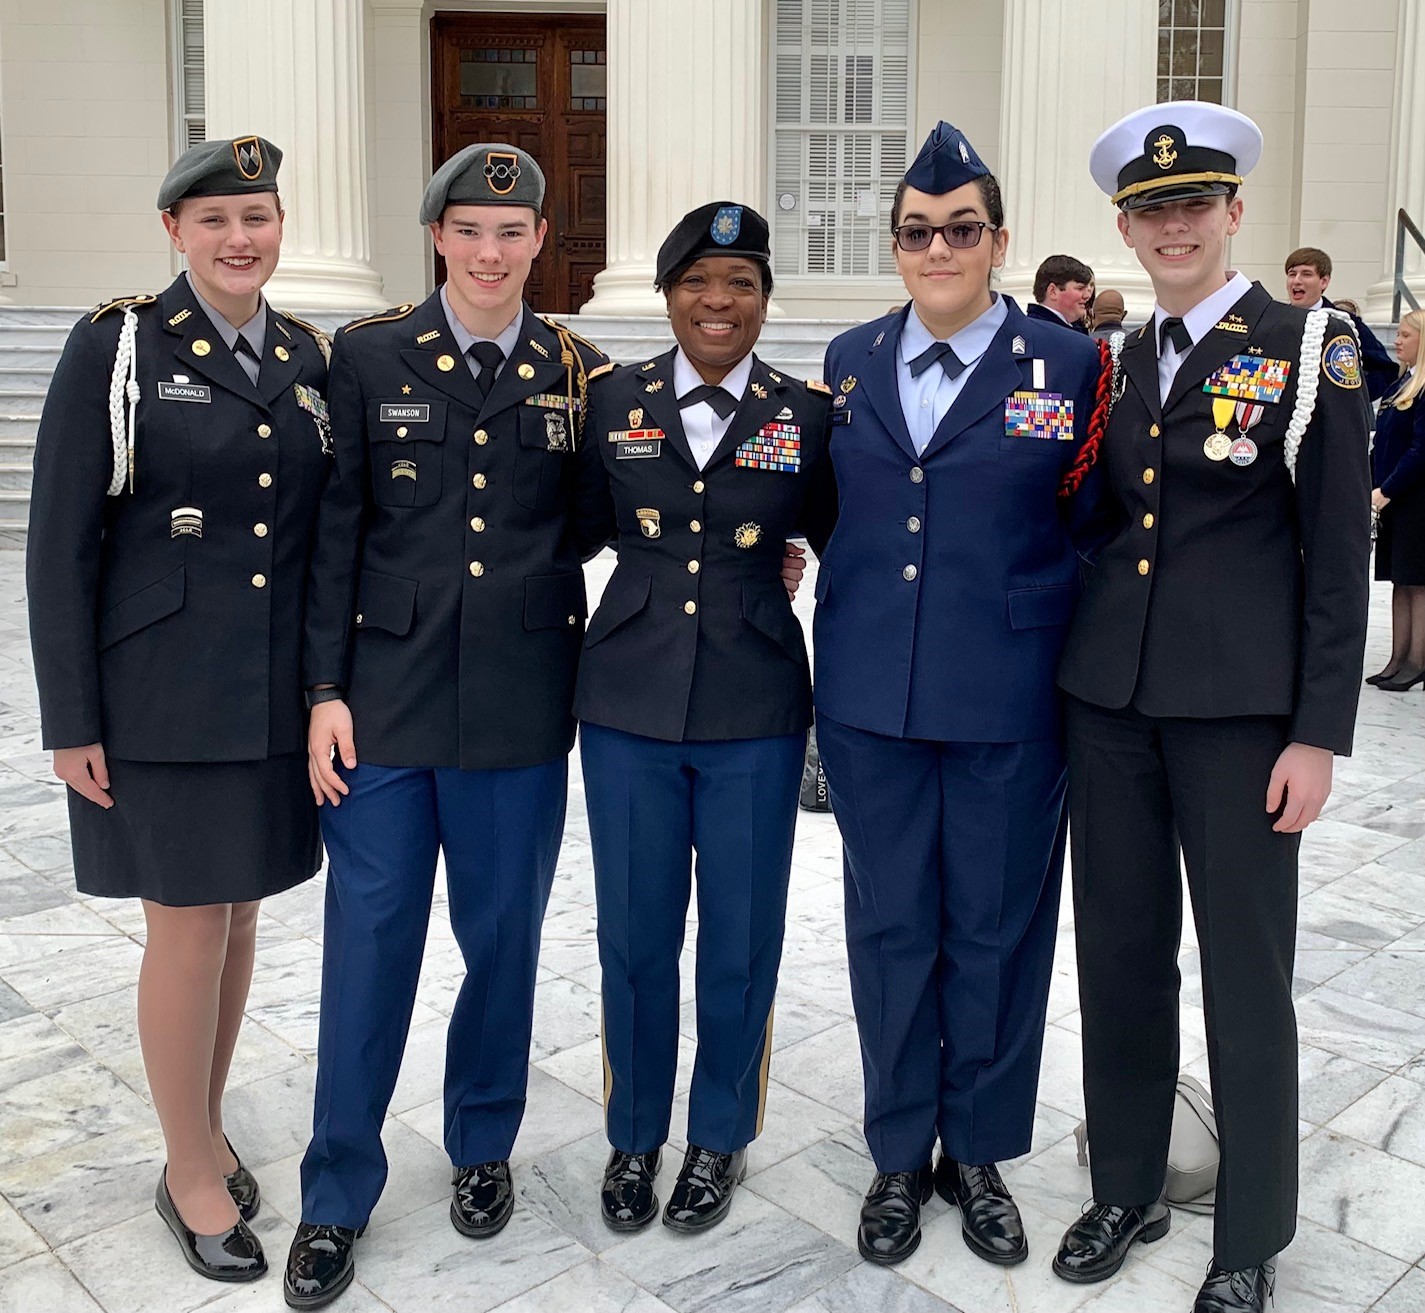 Career Technical Student Organization JROTC Officers and the AL CTE JROTC Section President pose for a group photo on the steps of Alabama State Capitol for CTE on the Hill.